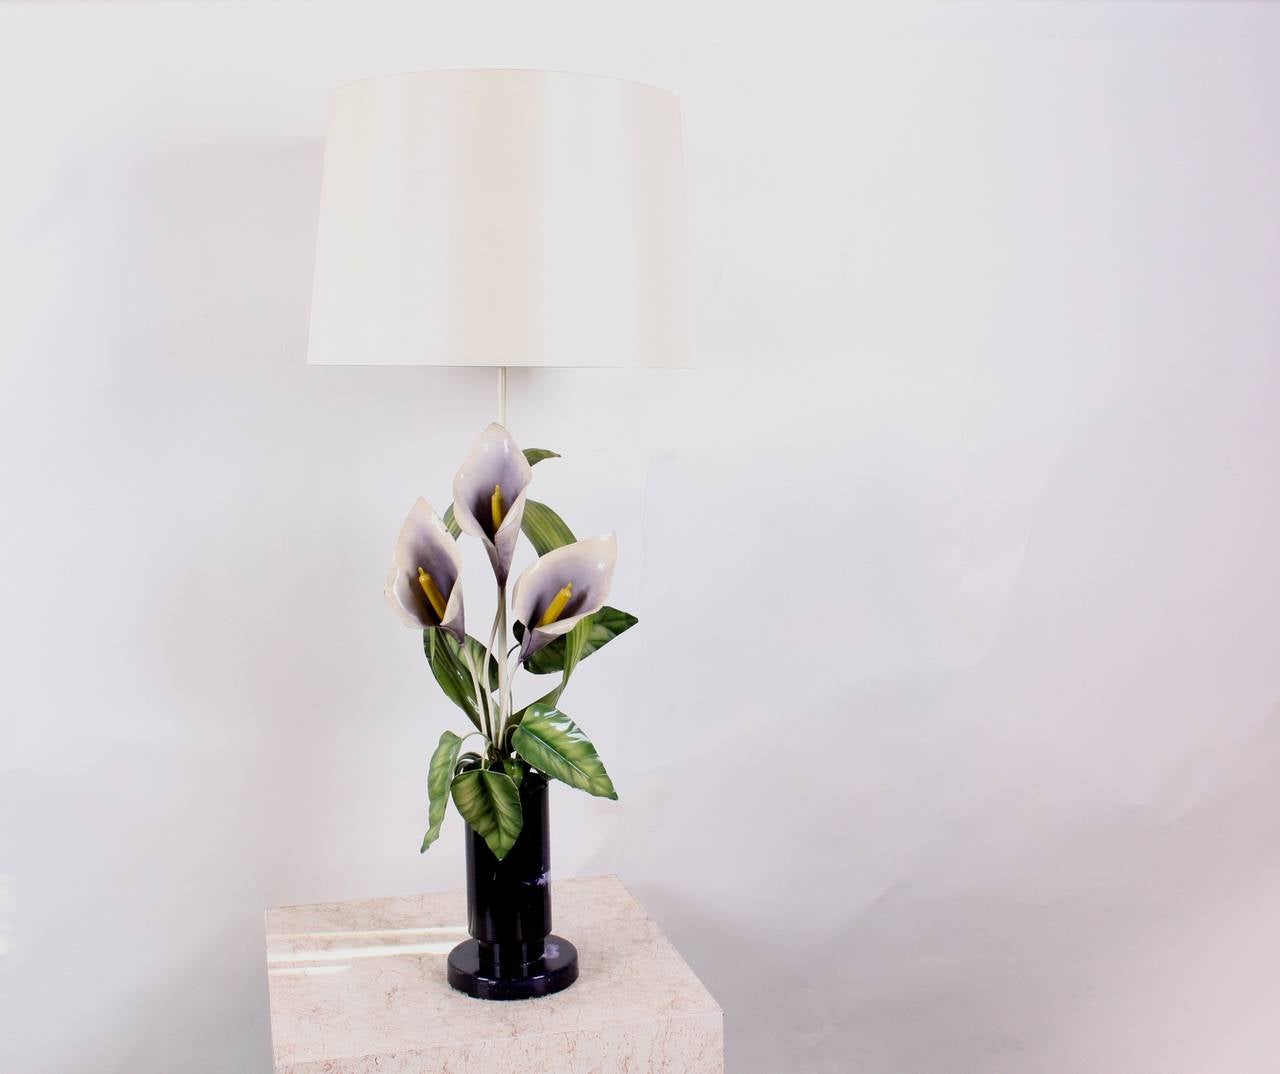 The lamp consists of three arranged calla lilies which have stems, leaves and a circular base set in metal and white fabric shade. 50's Italian